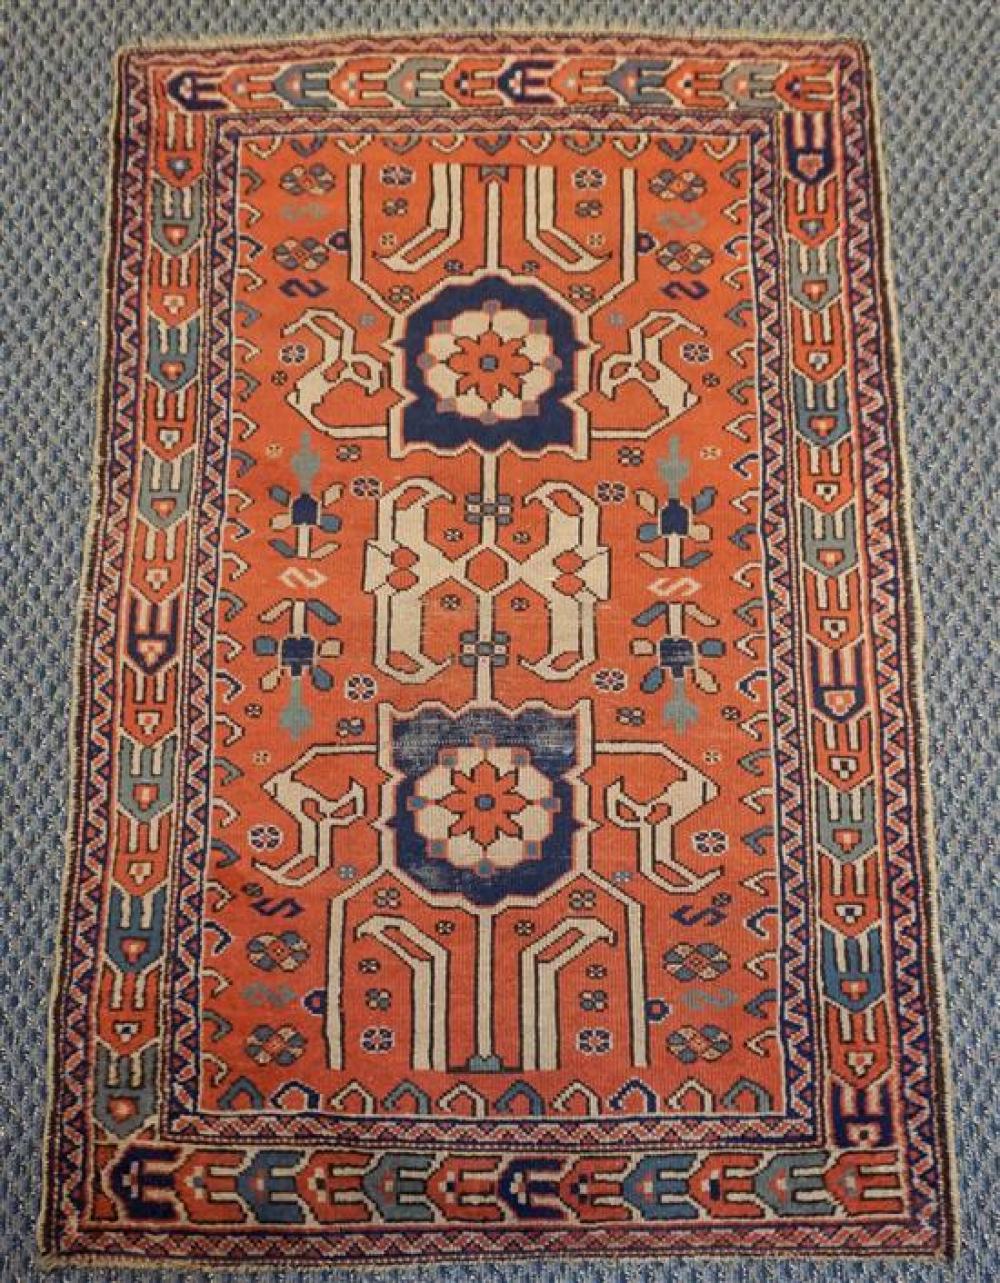 TURKISH RUG 5 FT 5 IN X 3 FT 3 31f4ed